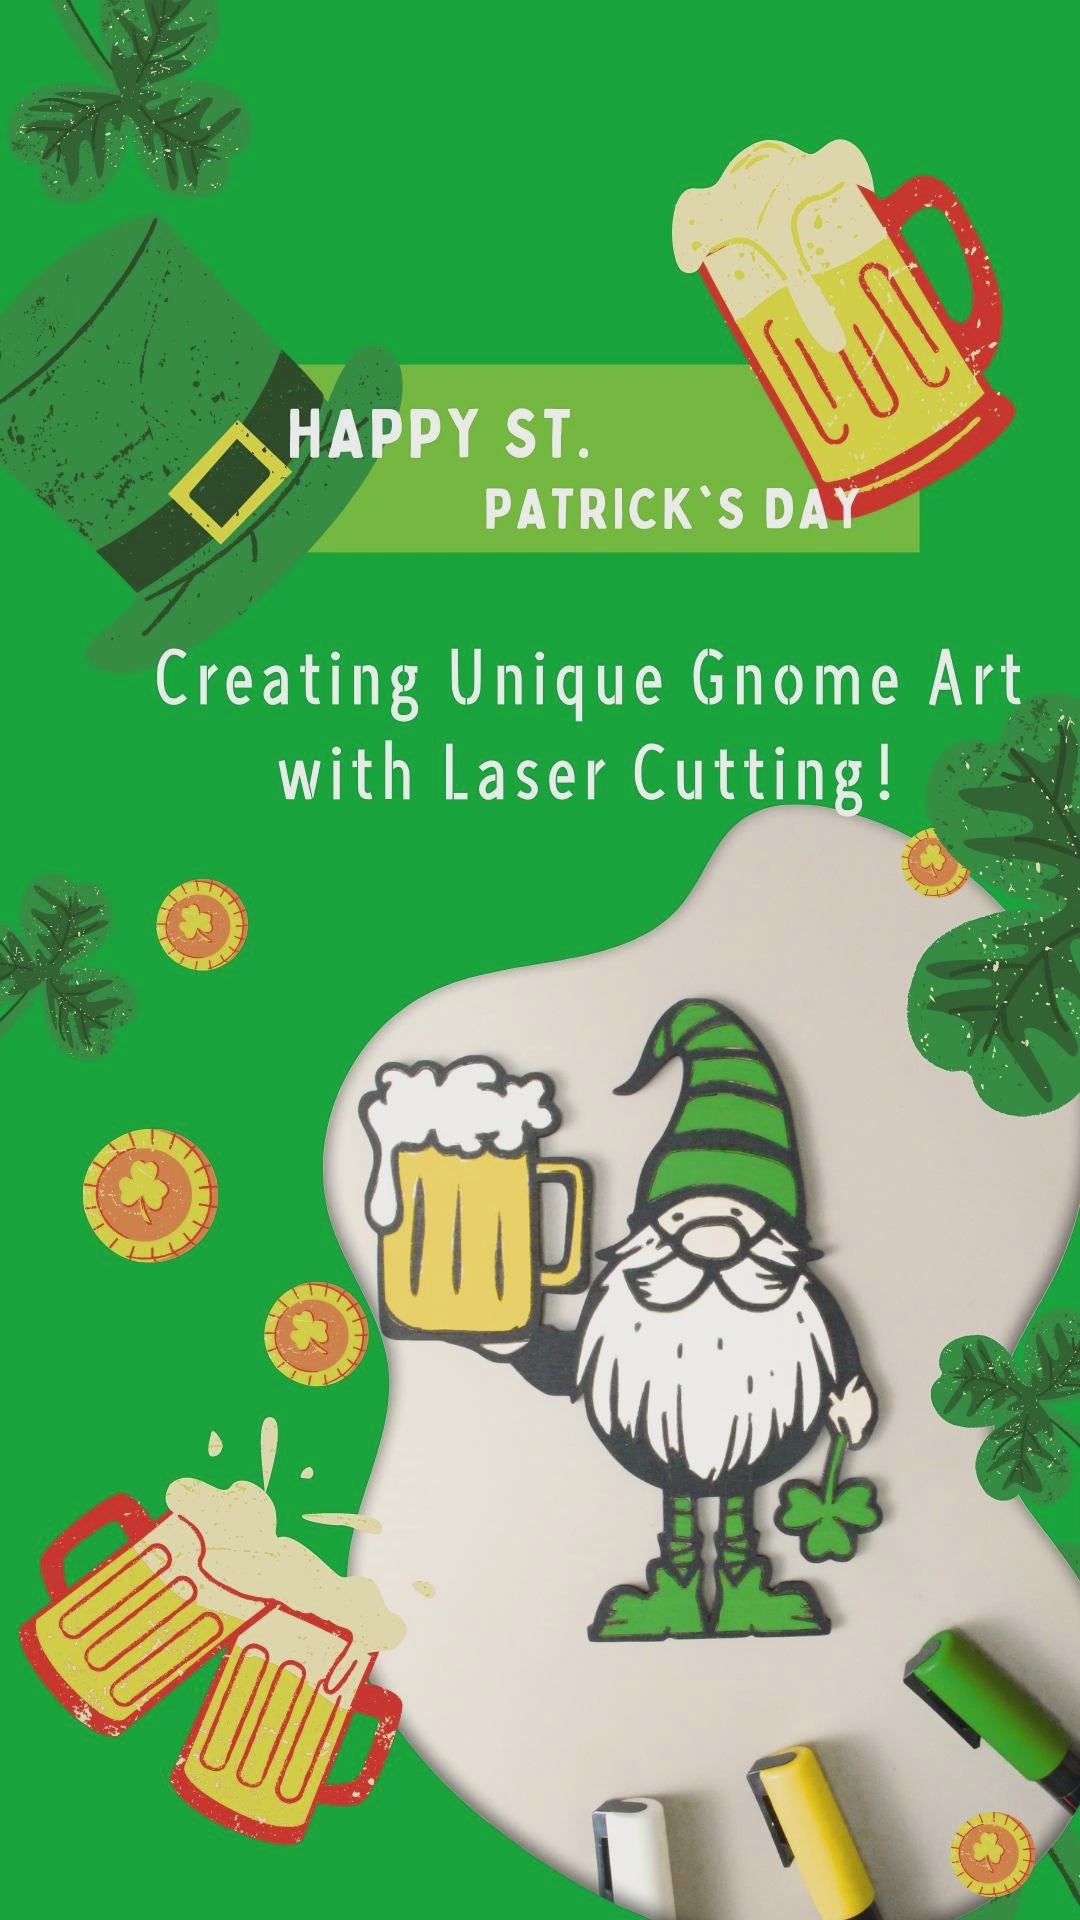 St. Patrick's Day inspired Gnome video